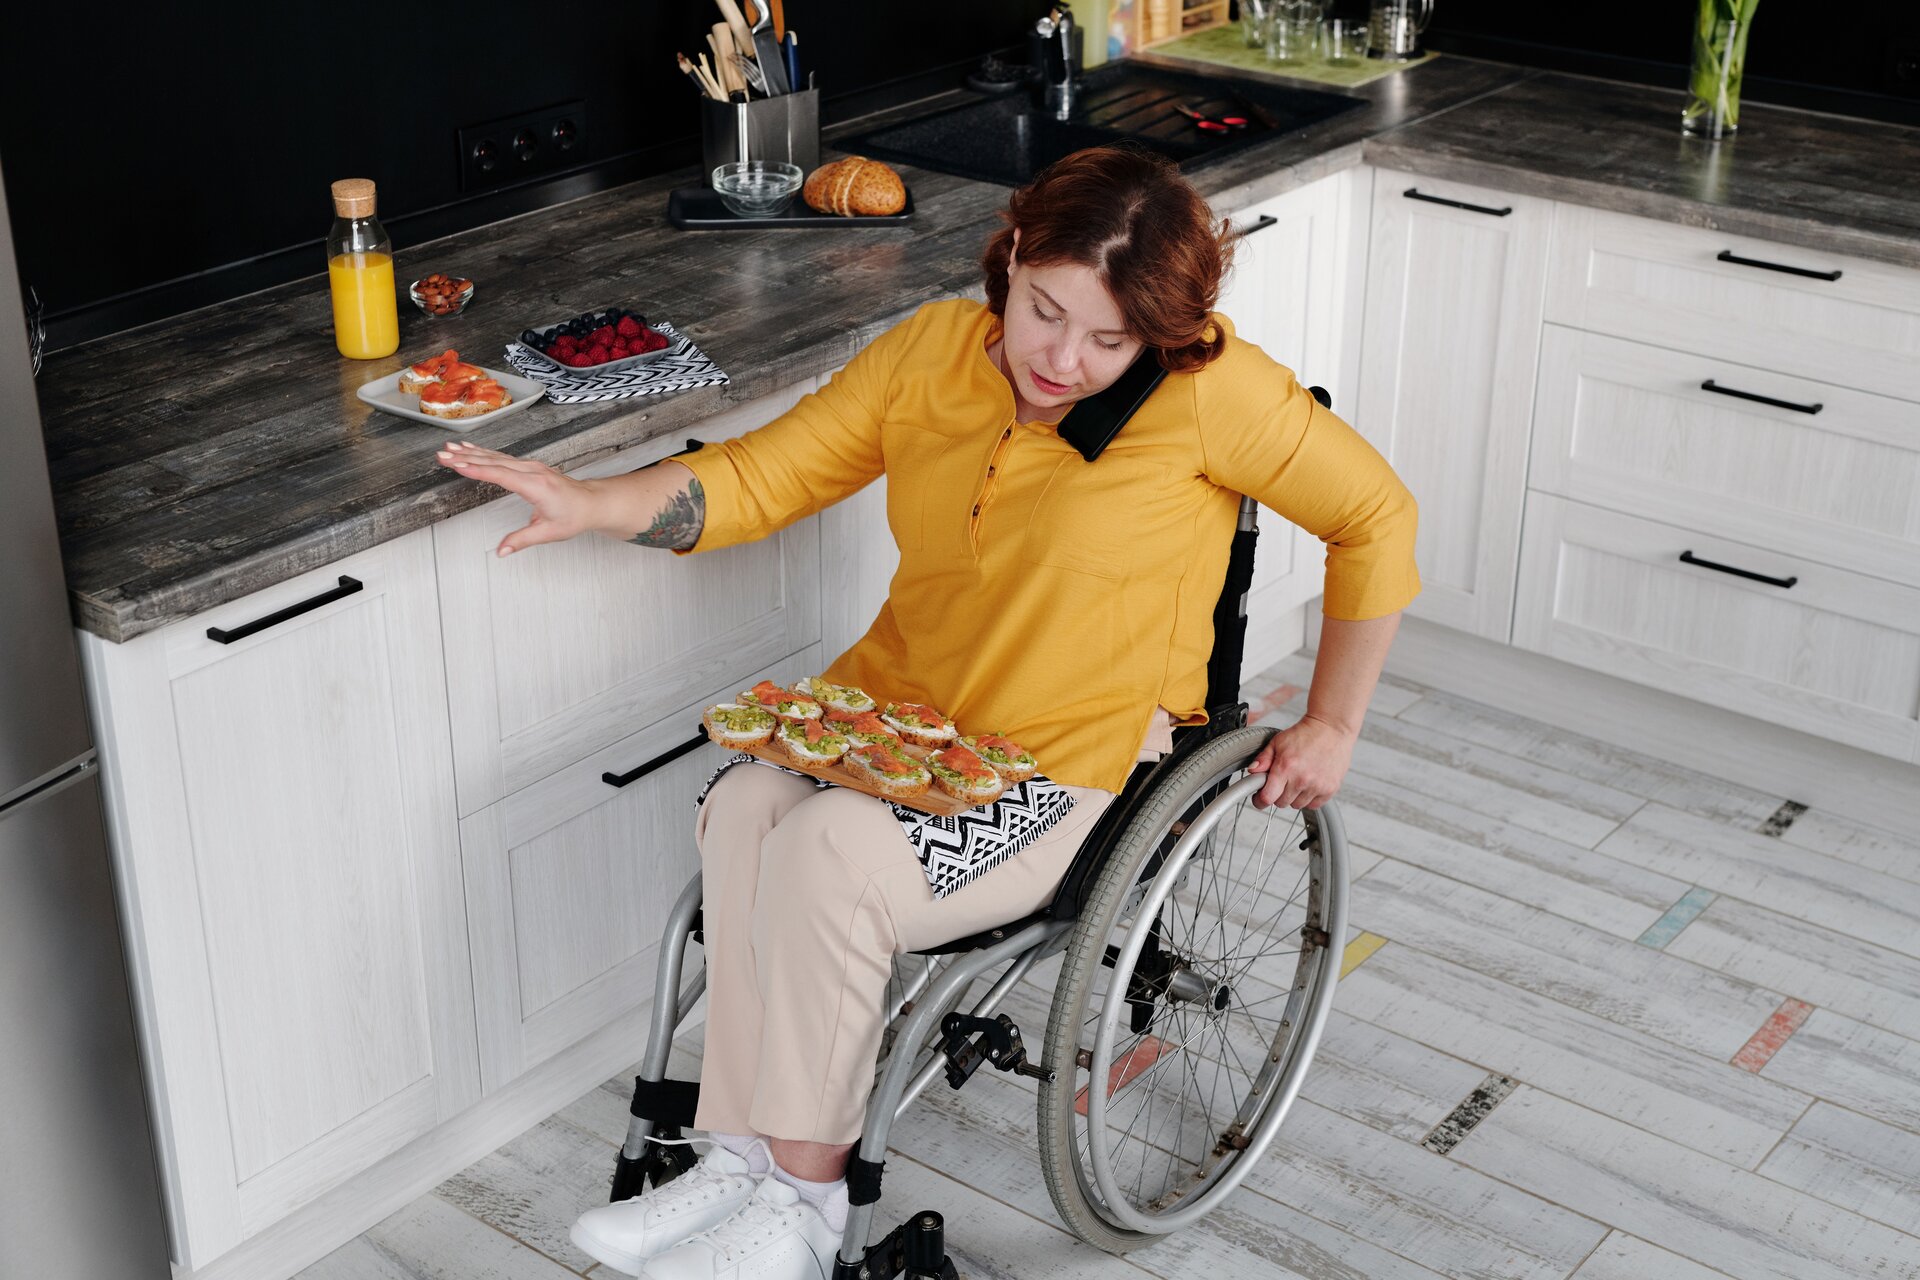 A woman wearing a yellow top and tan pants holding a phone between her ear and her shoulder while she positions food in her lap with one hand while she propels the wheelchair with the other